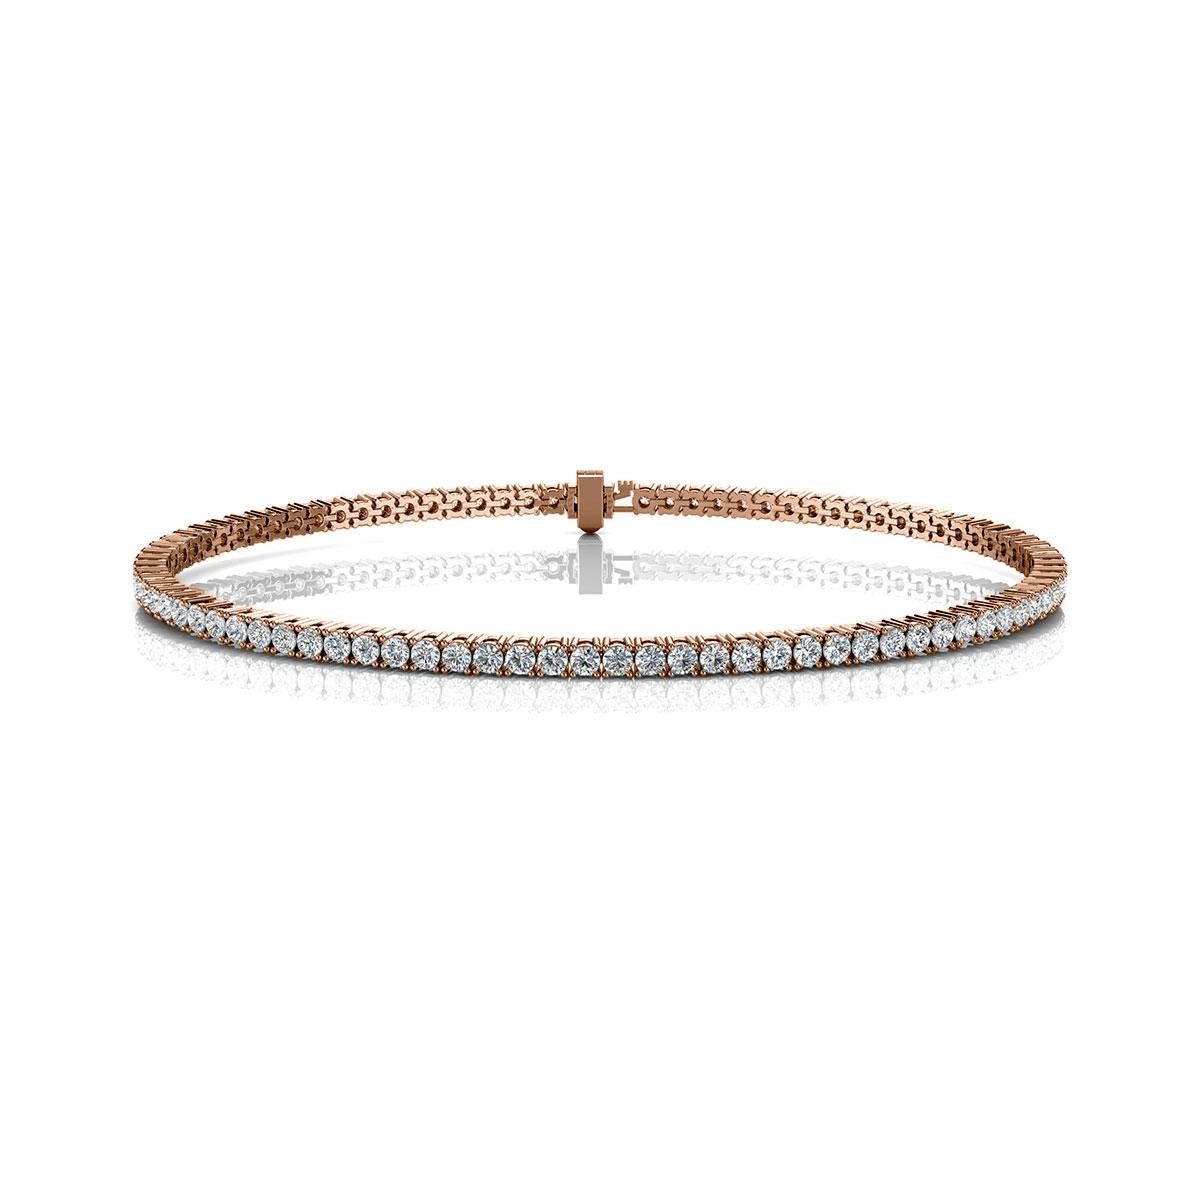 A timeless four prongs diamonds tennis bracelet. Experience the Difference!

Product details: 

Center Gemstone Type: NATURAL DIAMOND
Center Gemstone Color: WHITE
Center Gemstone Shape: ROUND
Center Diamond Carat Weight: 2
Metal: 14K Rose Gold
Metal